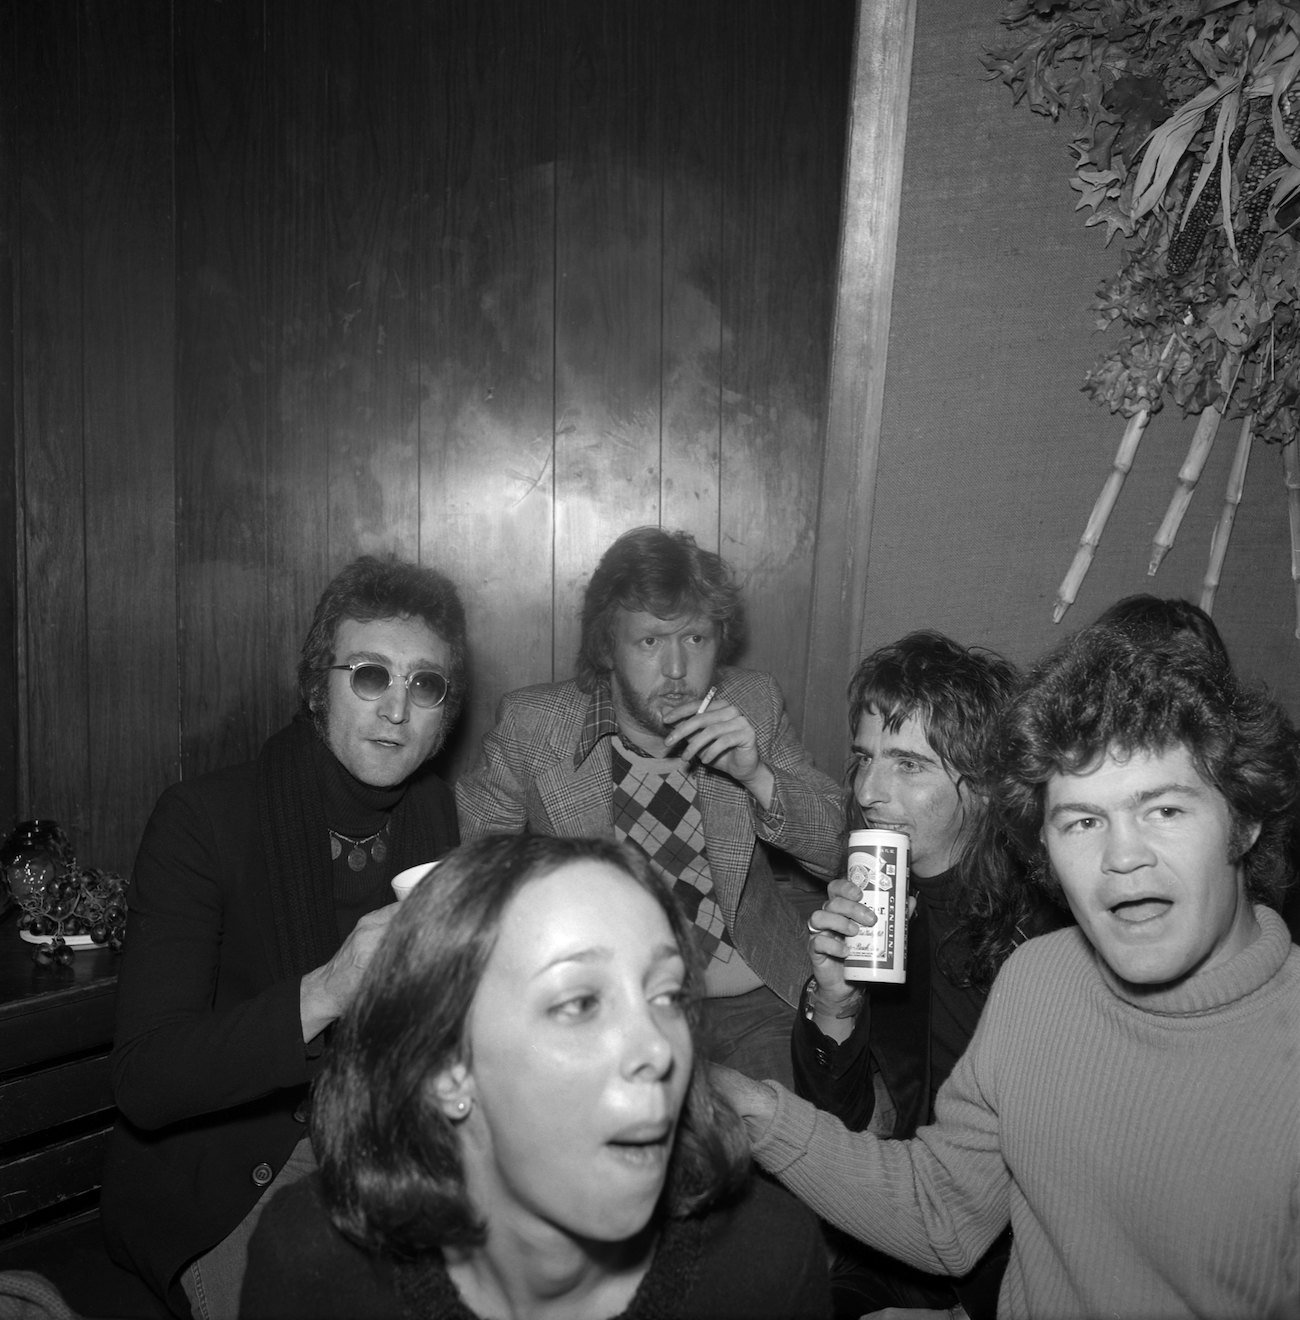 John Lennon out with friends in 1973.